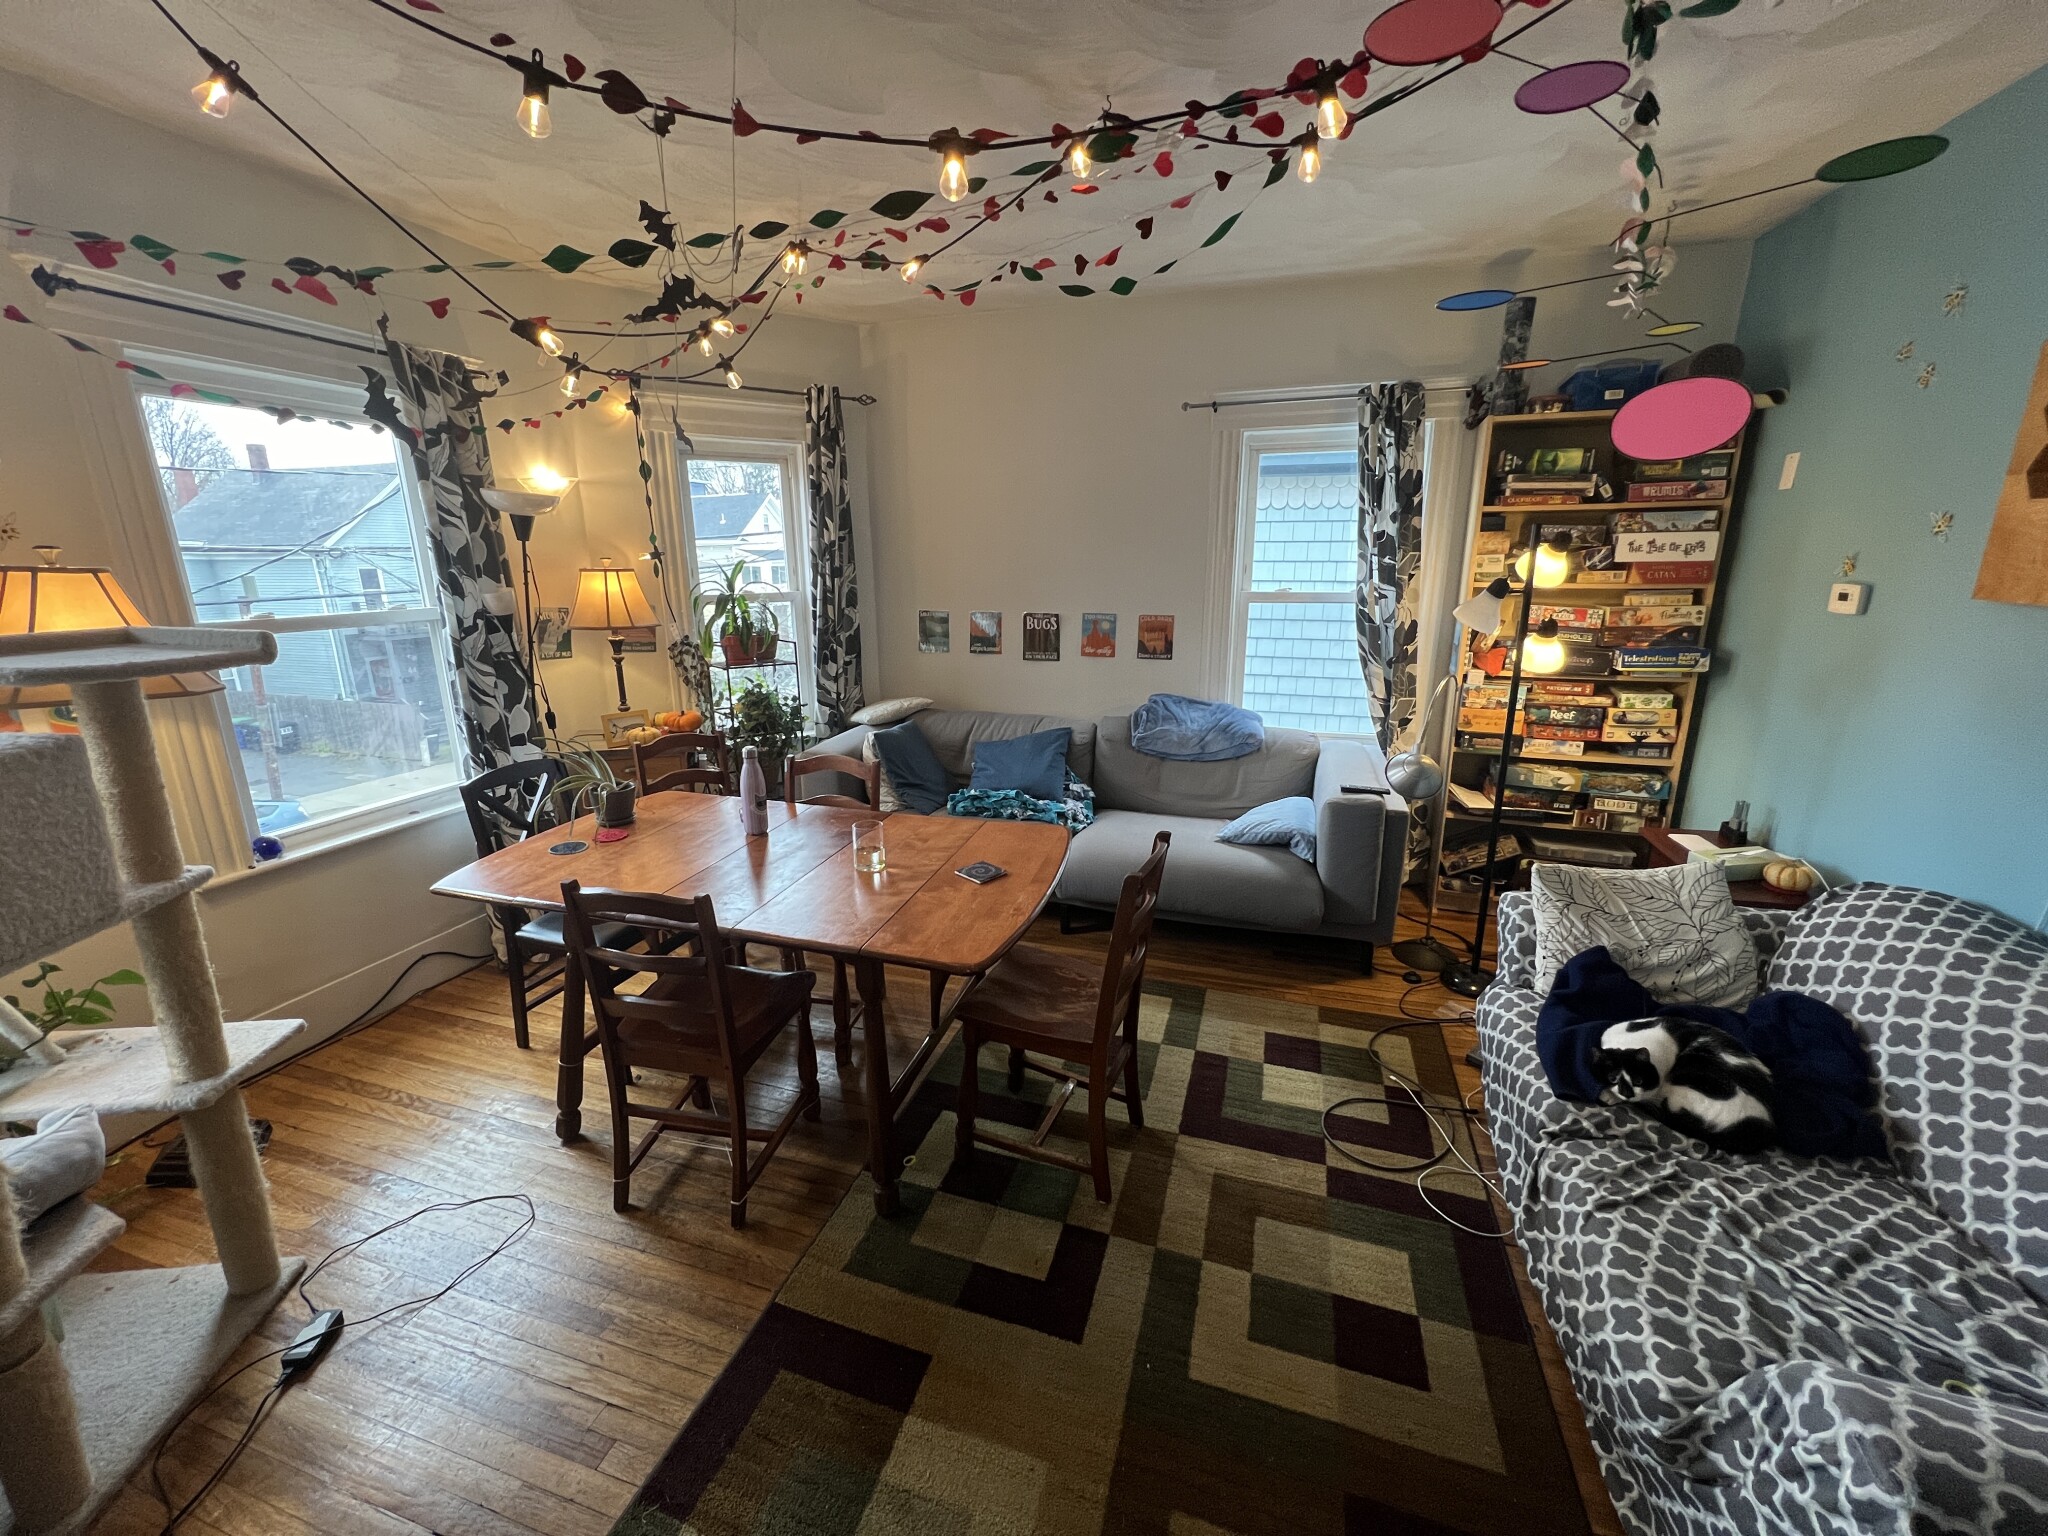 Photos of apartment on Cameron Ave.,Somerville MA 02144